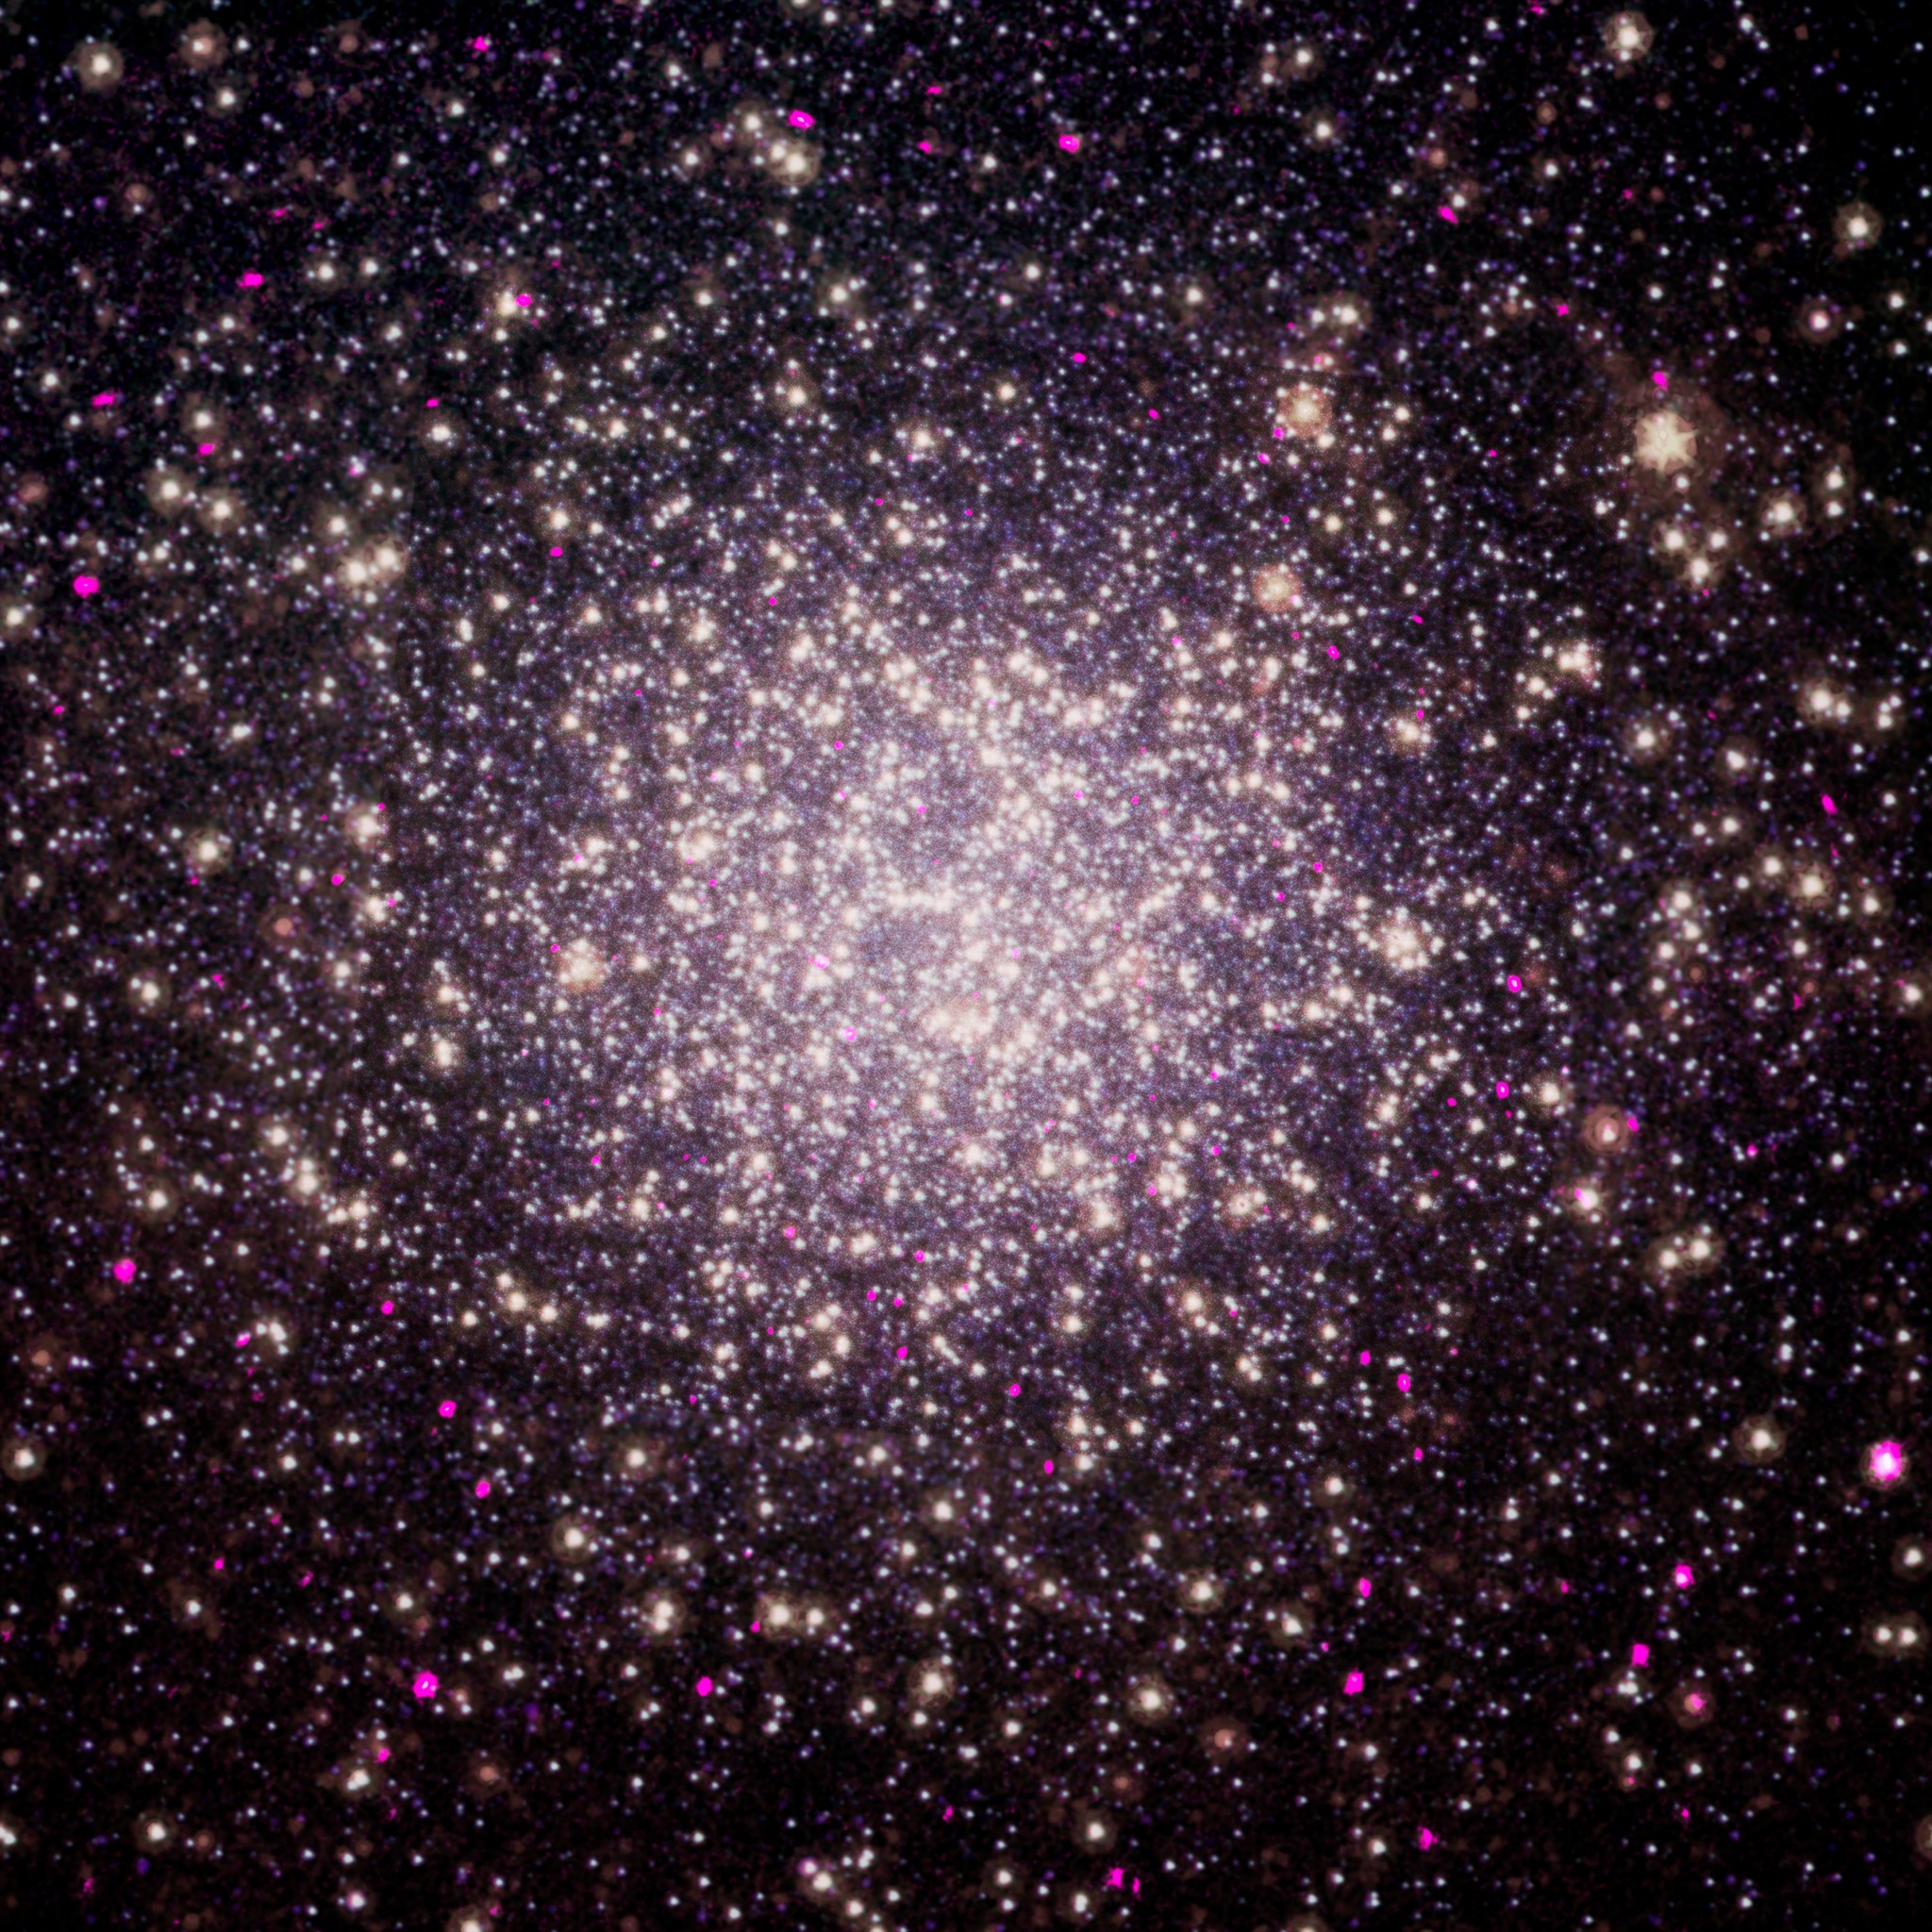 A cluster brimming with millions of stars glistens like an iridescent opal in this image from NASA's Spitzer Space Telescope. Called Omega Centauri, the sparkling orb of stars is like a miniature galaxy. It is the biggest and brightest of the 150 or so similar objects, called globular clusters, that orbit around the outside of our Milky Way galaxy. Stargazers at southern latitudes can spot the stellar gem with the naked eye in the constellation Centaurus. Globular clusters are some of the oldest objects in our universe. Their stars are over 12 billion years old, and, in most cases, formed all at once when the universe was just a toddler. Omega Centauri is unusual in that its stars are of different ages and possess varying levels of metals, or elements heavier than boron. Astronomers say this points to a different origin for Omega Centauri than other globular clusters: they think it might be the core of a dwarf galaxy that was ripped apart and absorbed by our Milky Way long ago. In this new view of Omega Centauri, Spitzer's infrared observations have been combined with visible-light data from the National Science Foundation's Blanco 4-meter telescope at Cerro Tololo Inter-American Observatory in Chile. Visible-light data with a wavelength of .55 microns is colored blue, 3.6-micron infrared light captured by Spitzer's infrared array camera is colored green and 24-micron infrared light taken by Spitzer's multiband imaging photometer is colored red. Where green and red overlap, the color yellow appears. Thus, the yellow and red dots are stars revealed by Spitzer. These stars, called red giants, are more evolved, larger and dustier. The stars that appear blue were spotted in both visible and 3.6-micron-, or near-, infrared light. They are less evolved, like our own sun. Some of the red spots in the picture are distant galaxies beyond our own.